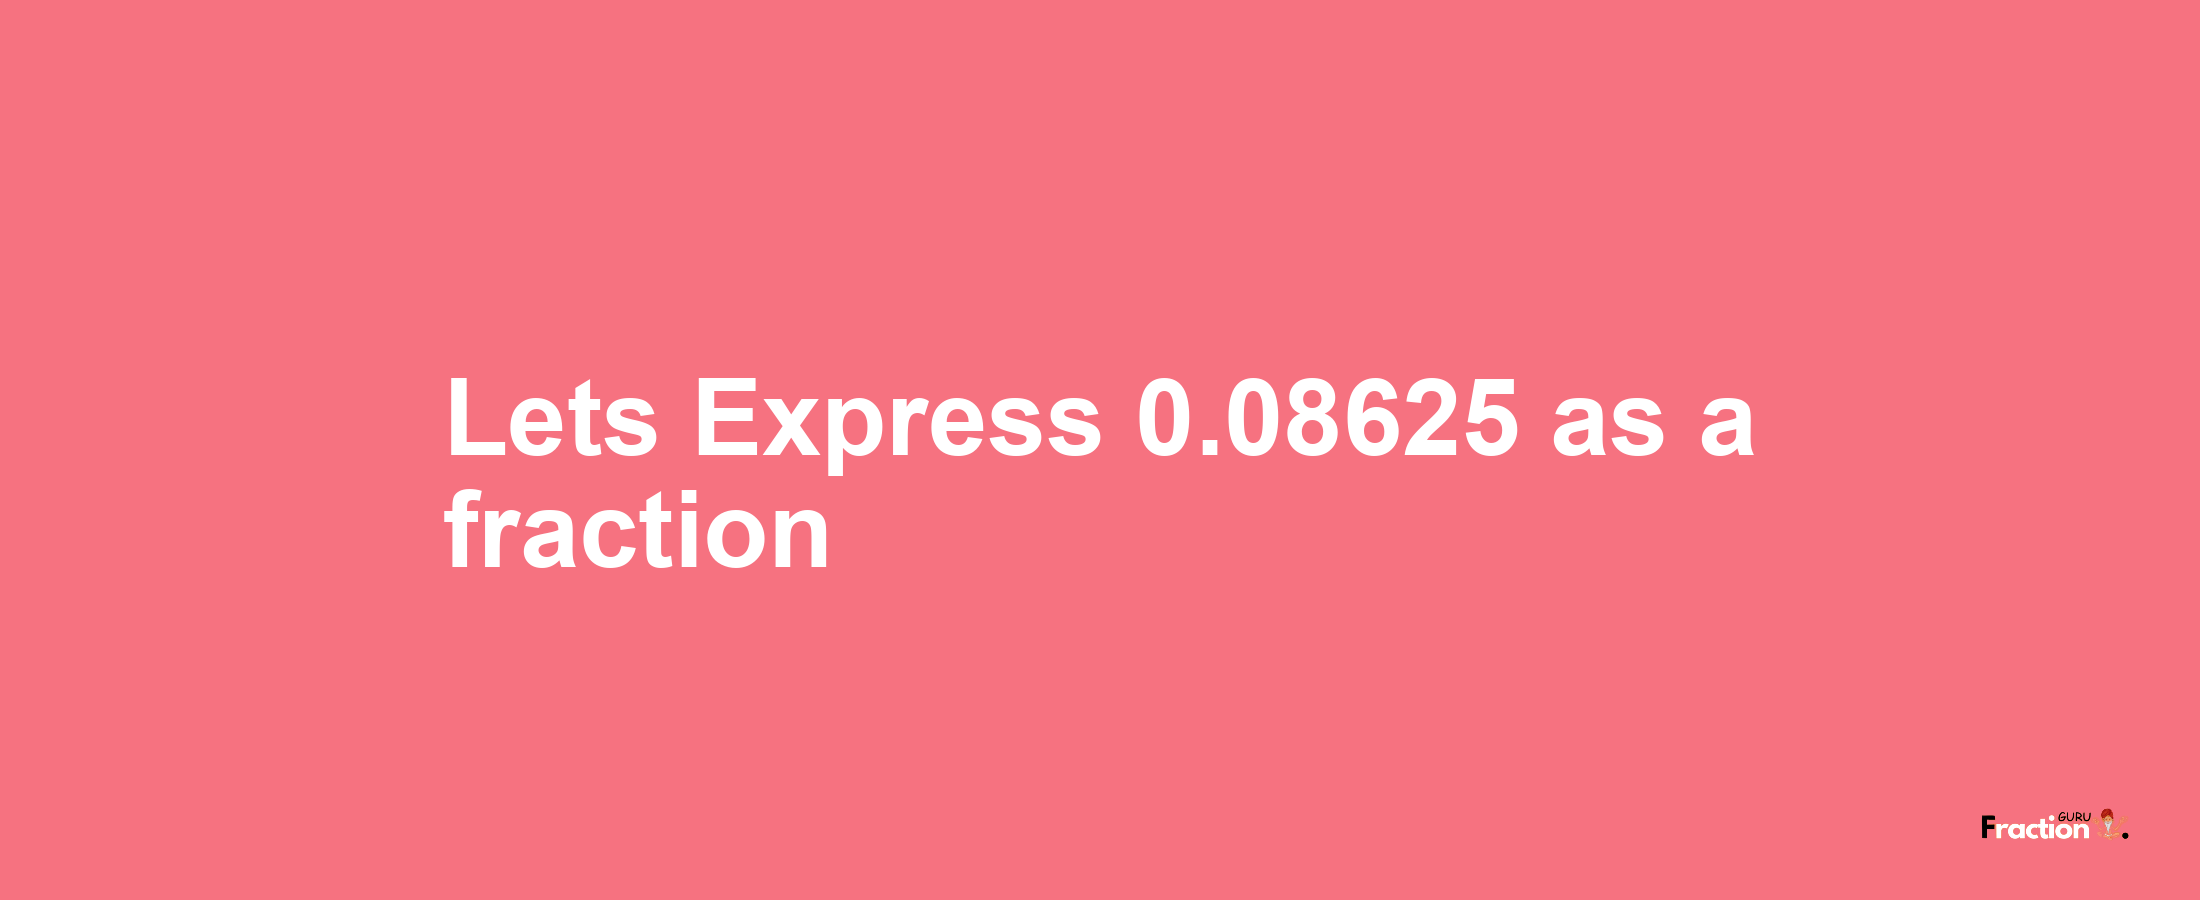 Lets Express 0.08625 as afraction